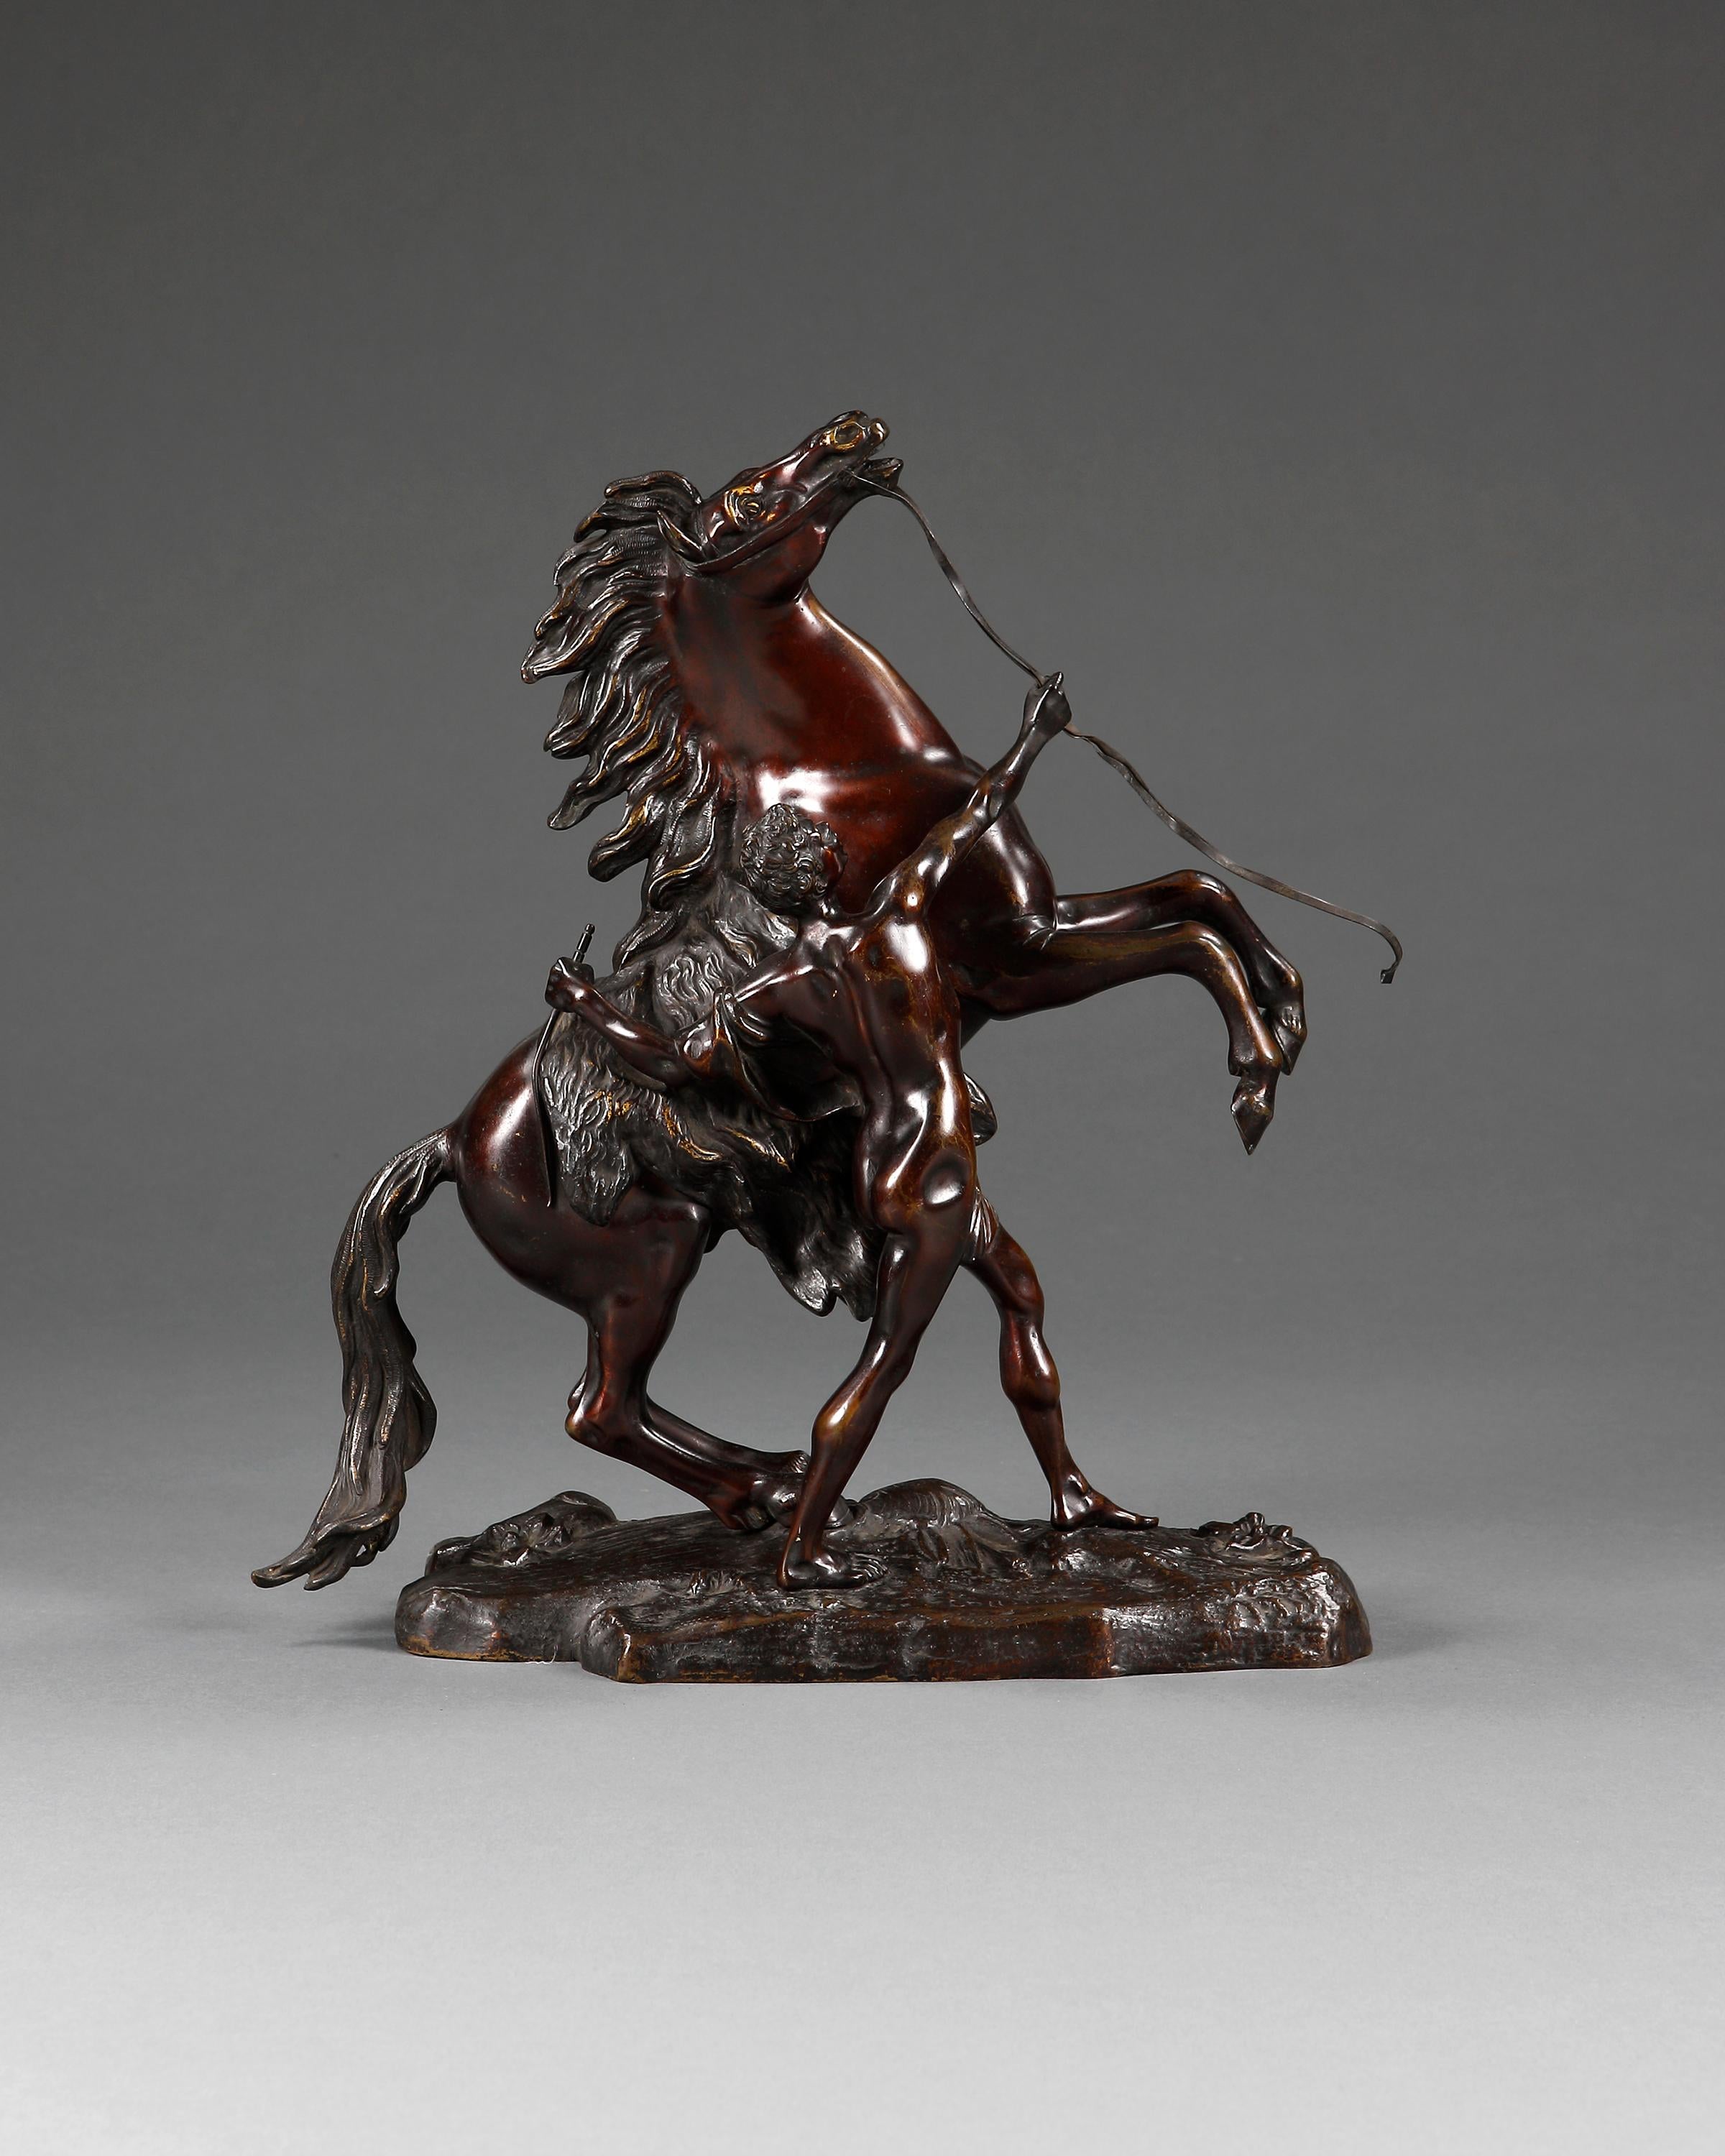 Fine pair of bronzes known as 'horse tamers' or 'horses restrained by grooms'. After the original by Guillaume Coustou the Elder (1677-1746). The original pair were commissioned for Chateau de Marly in 1739 and made in solid marble. This pair now